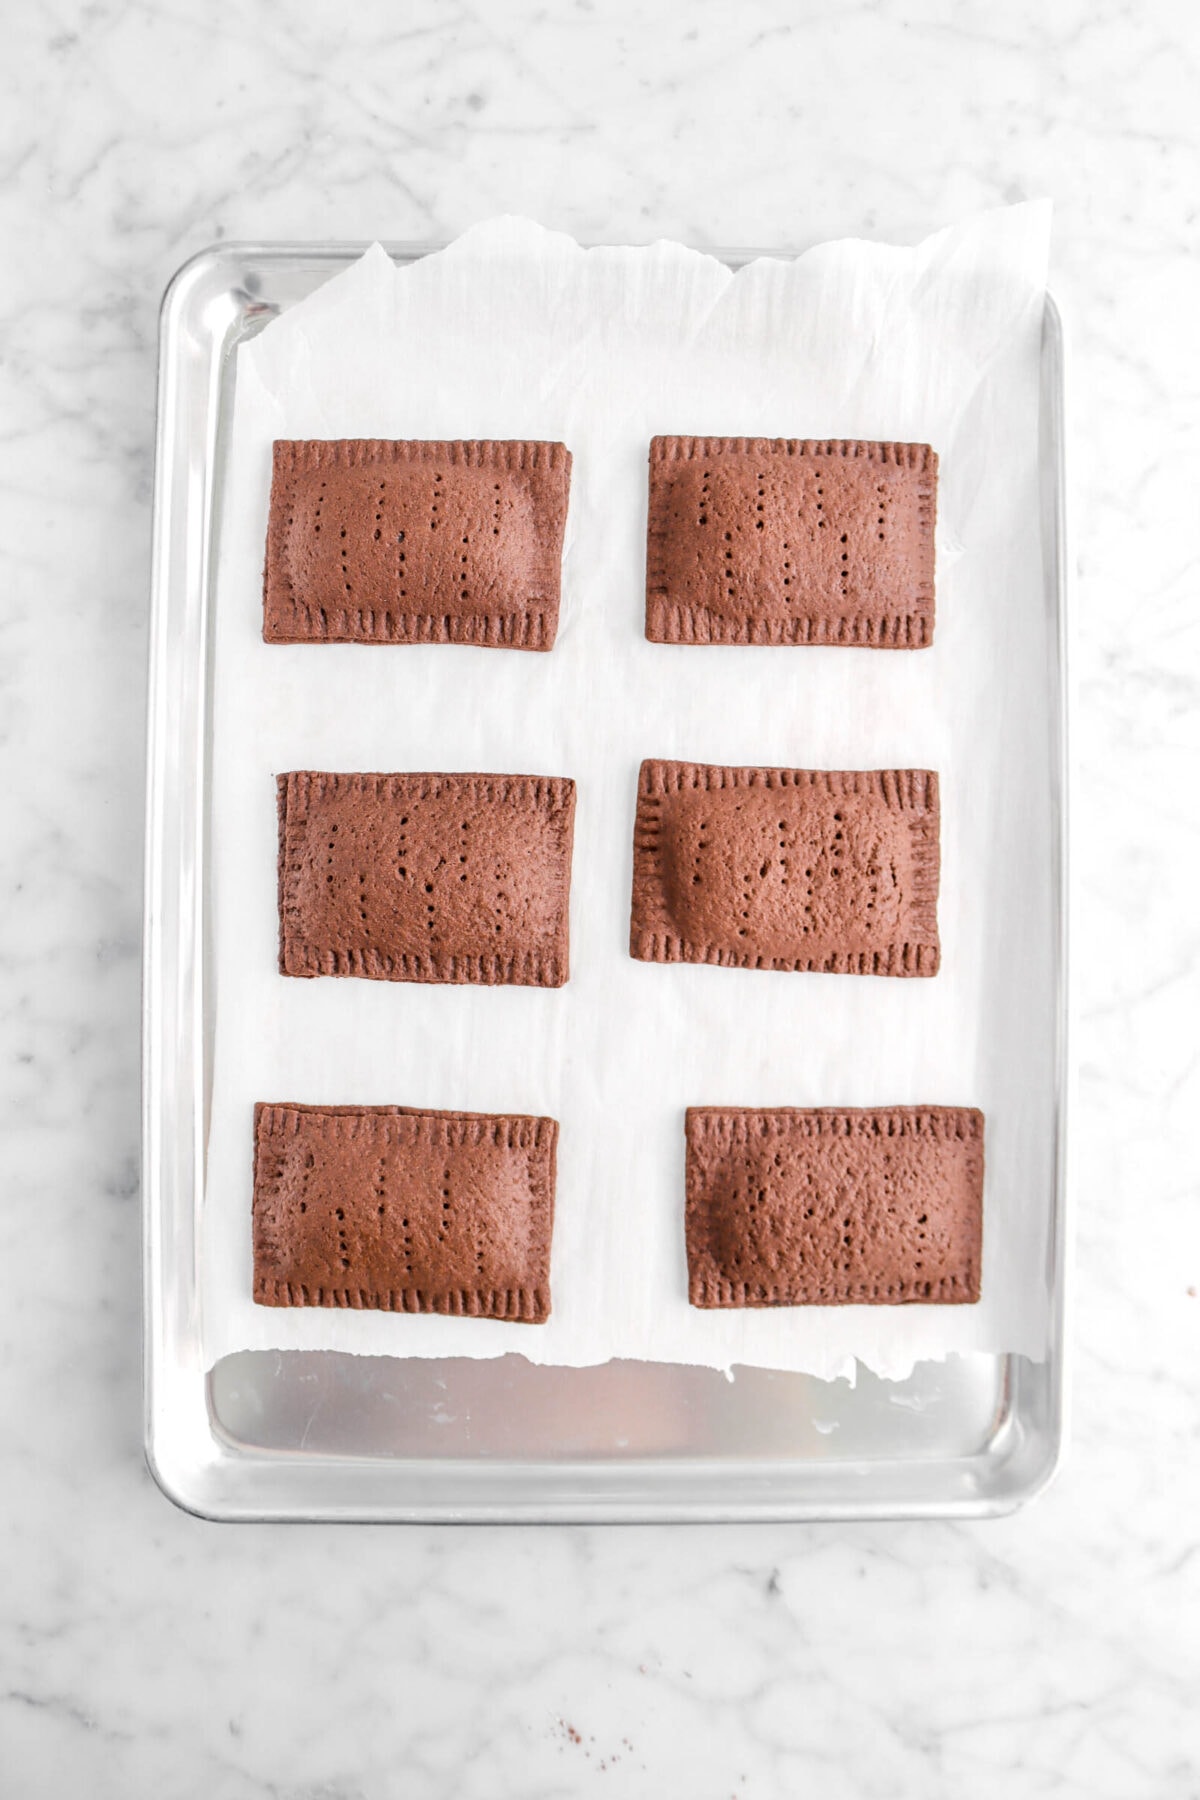 six baked chocolate pastries on lined sheet pan